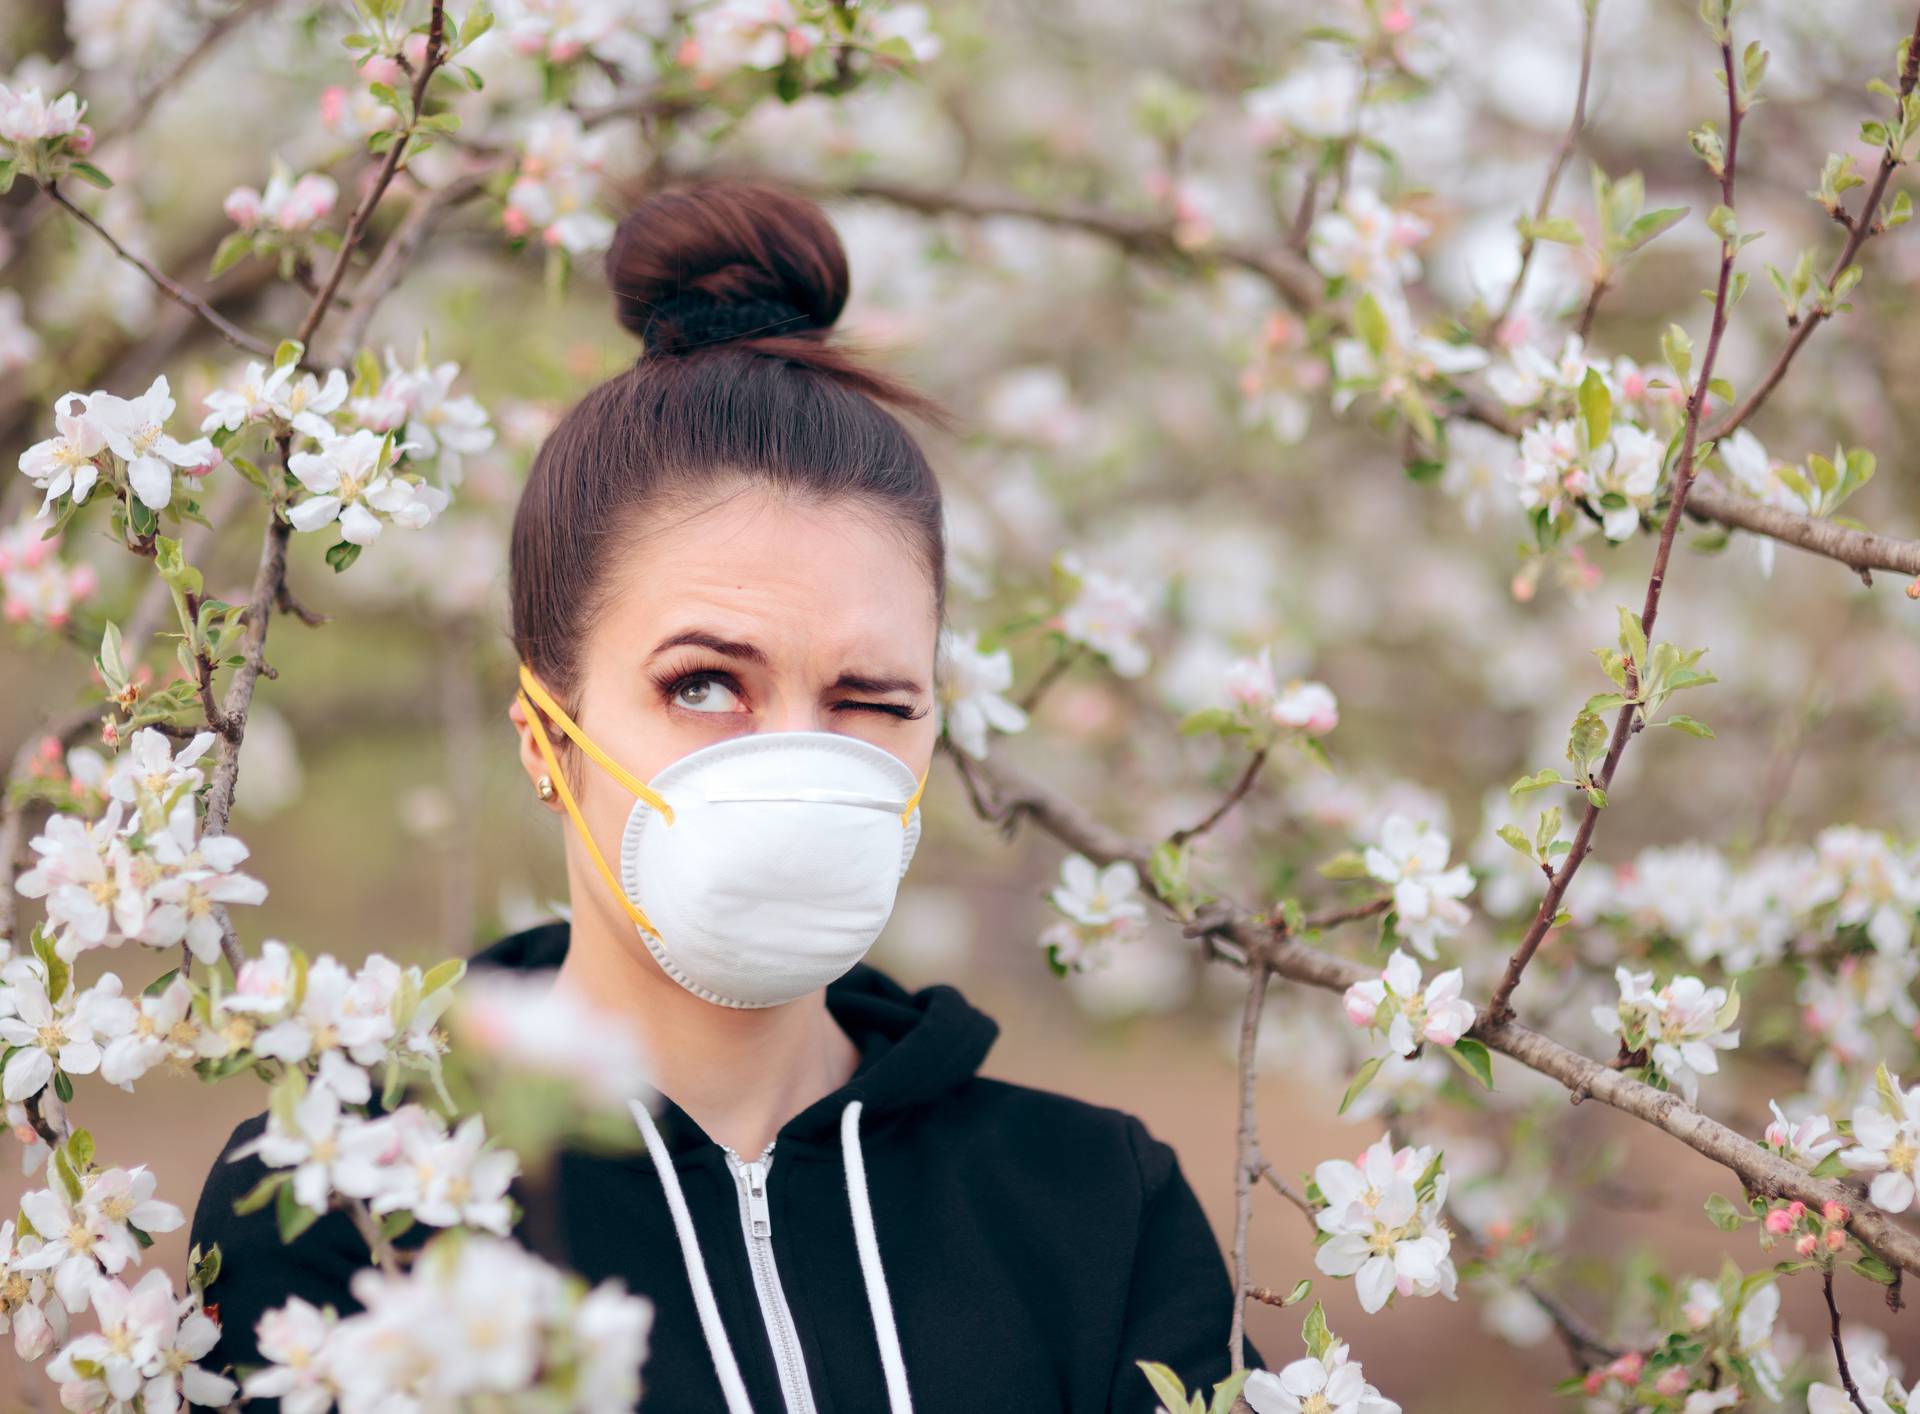 Woman with Respirator Mask Fighting Spring Allergies